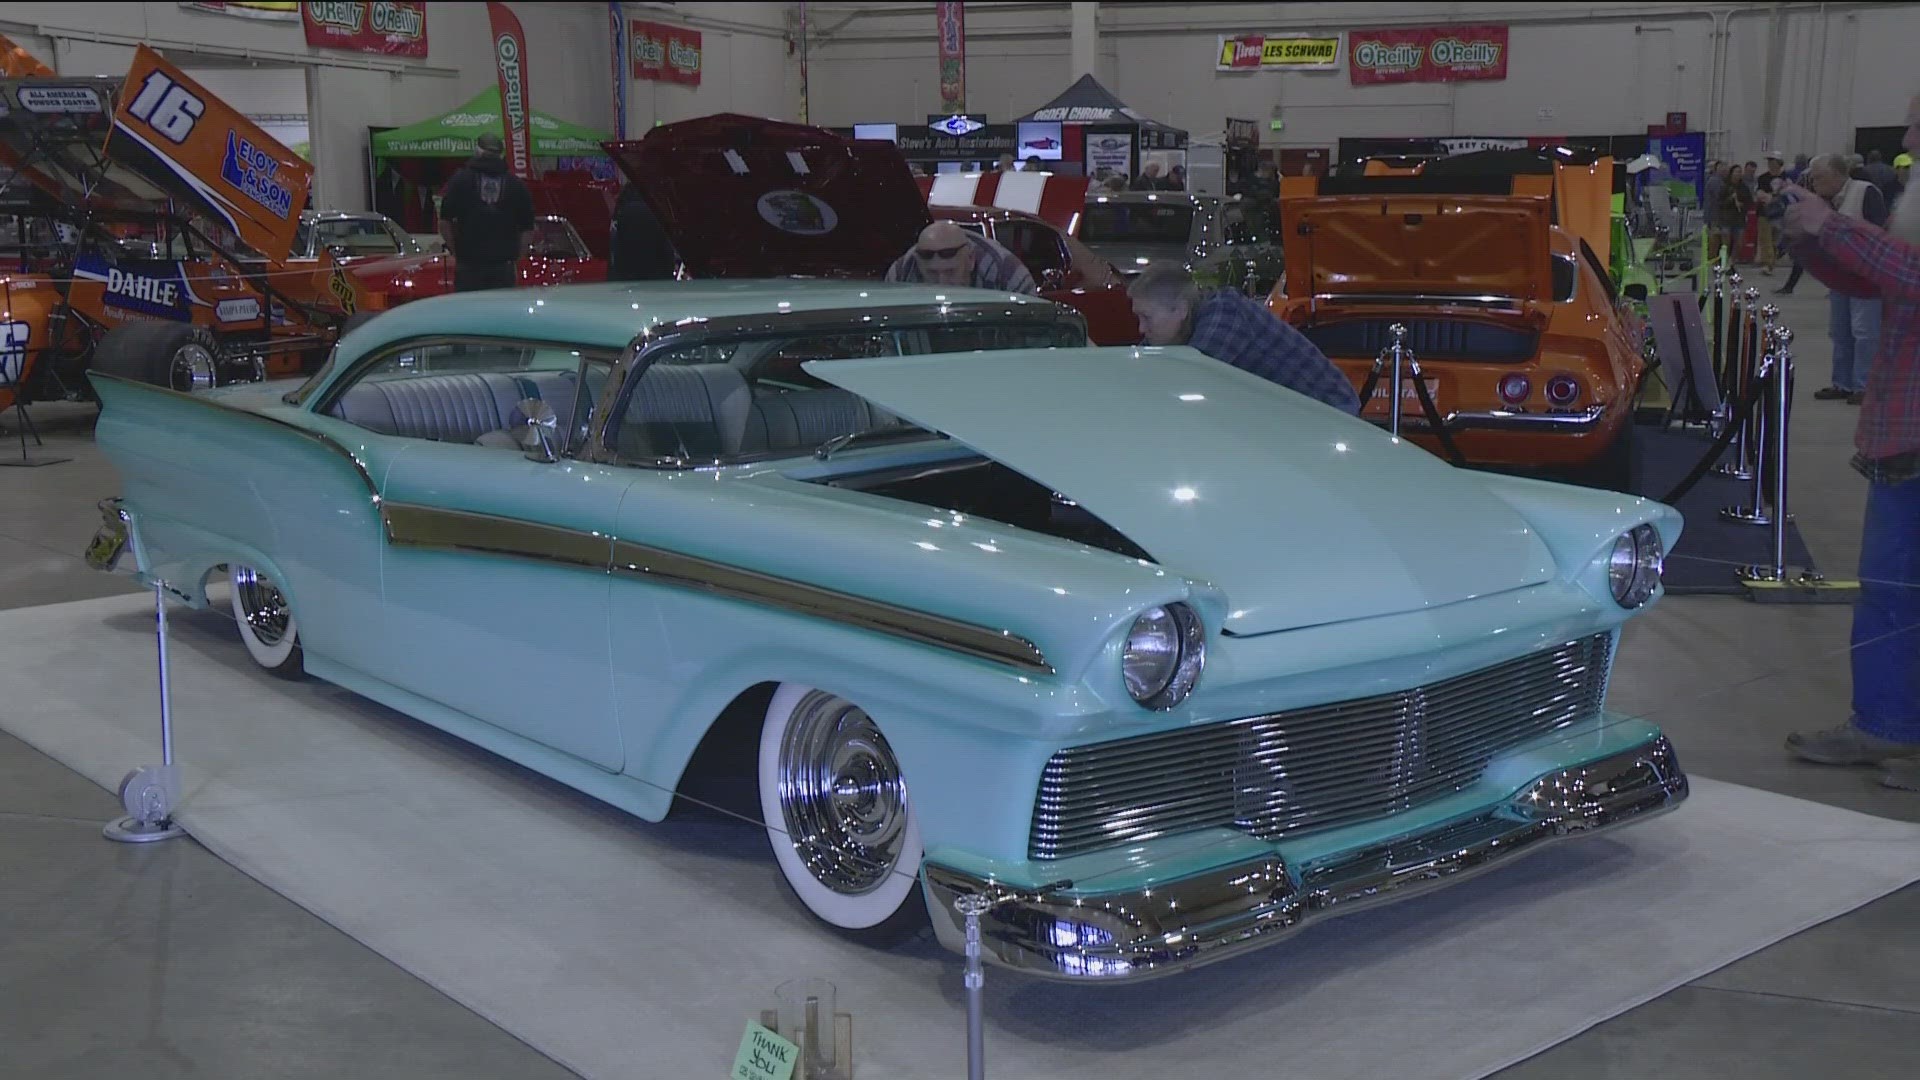 The event runs through Sunday and brings hot rods, customs, motorcycles and more to Expo Idaho. Chip Foose is also set to appear as the special guest.